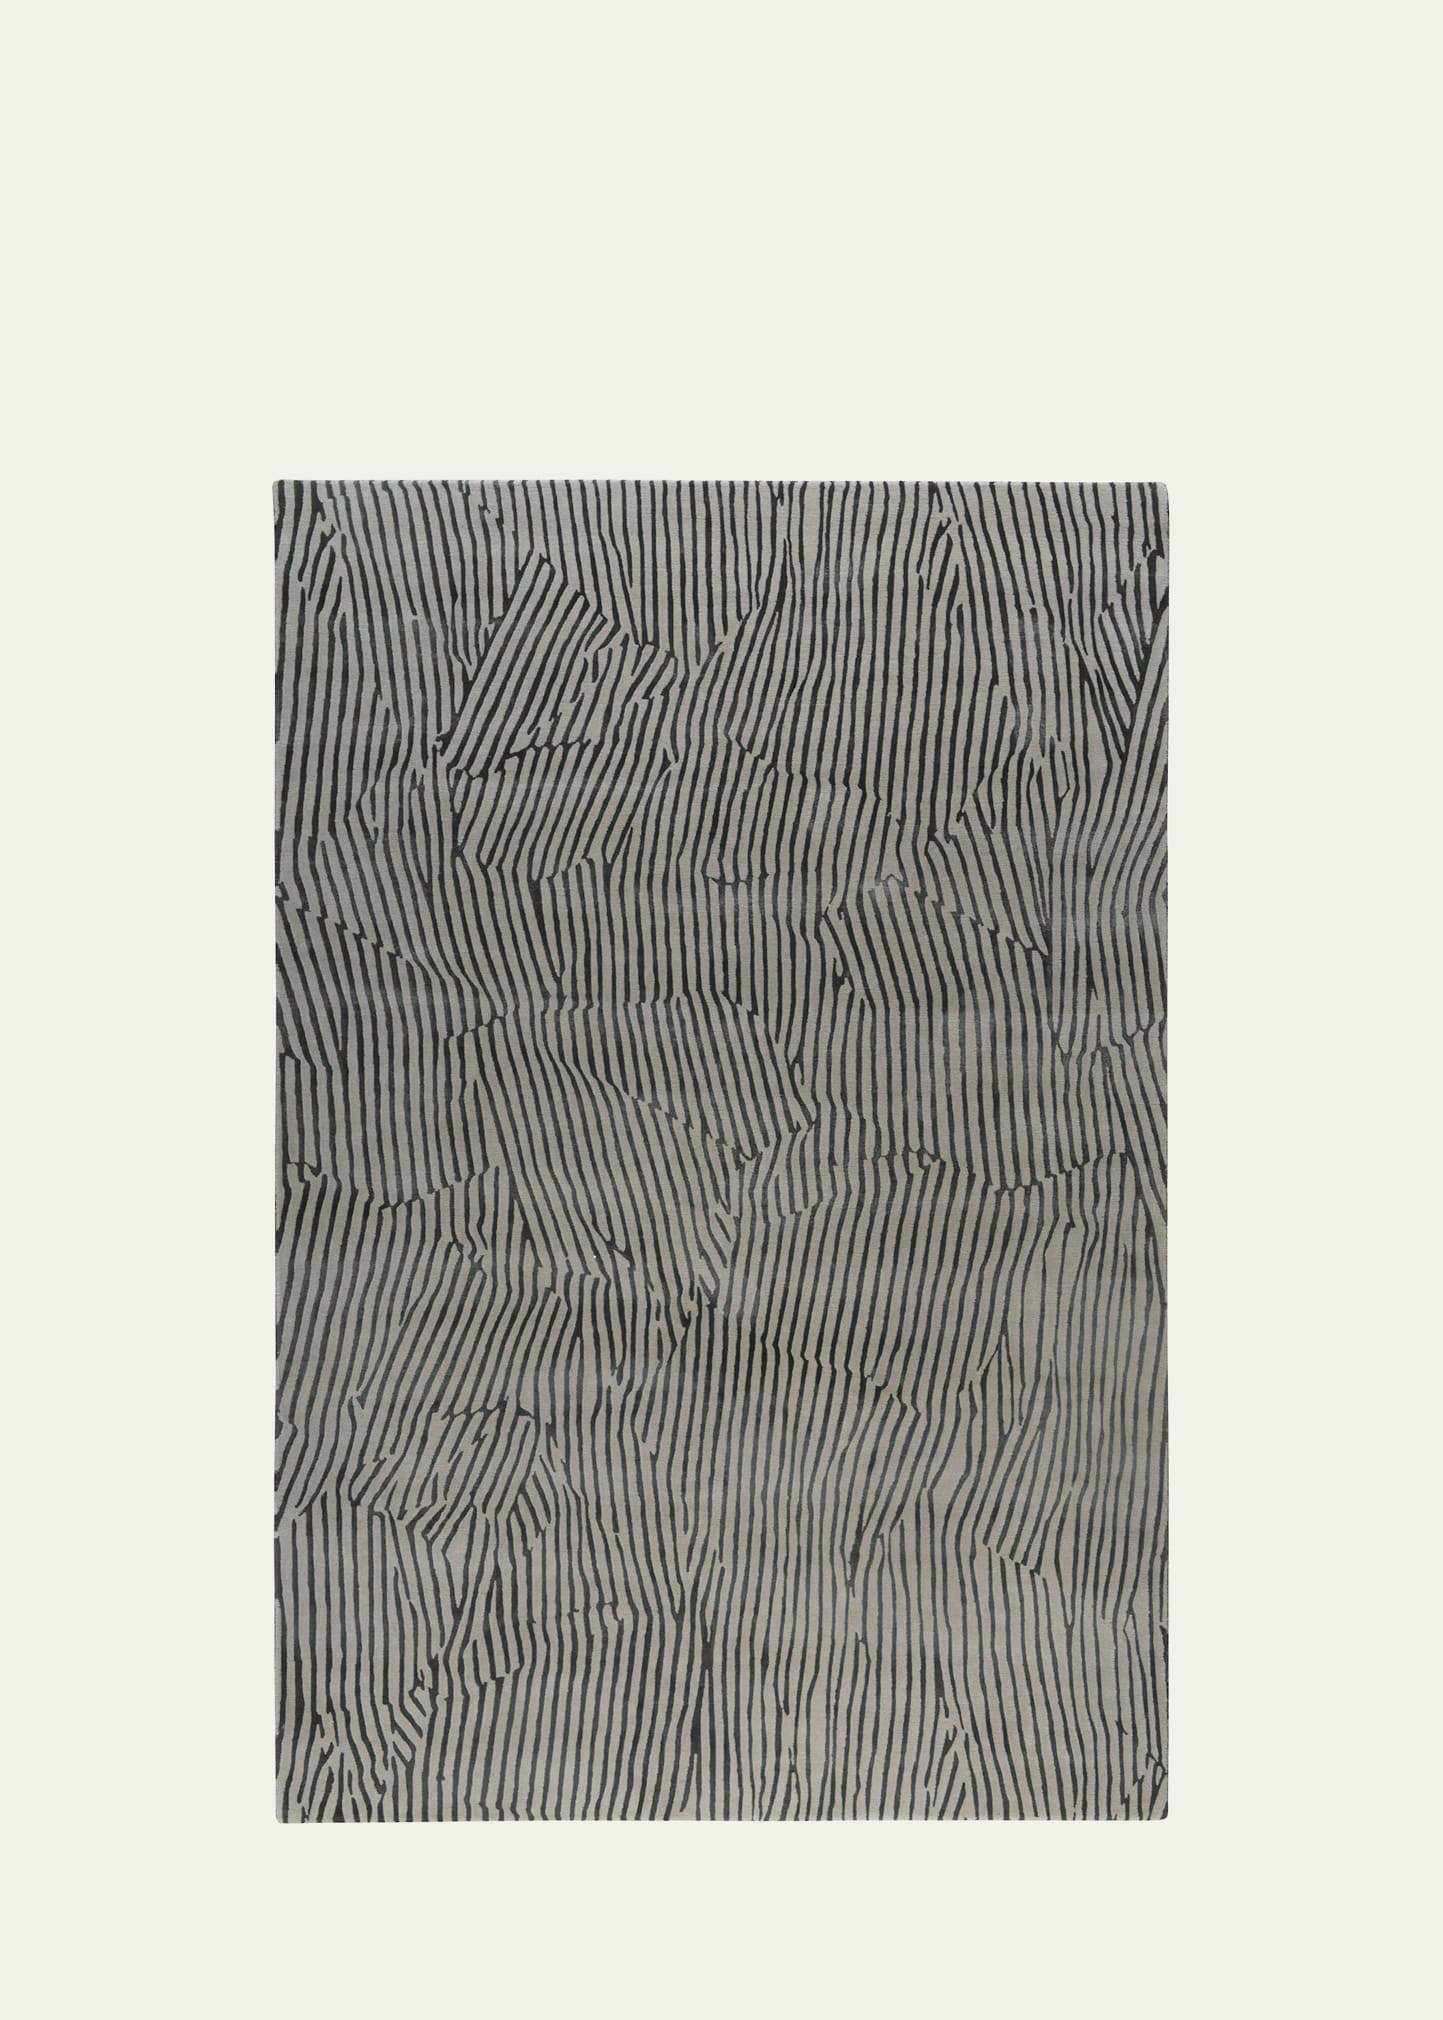 Avant Graphite Shaped Hand-Knotted Rug, 6' x 9'